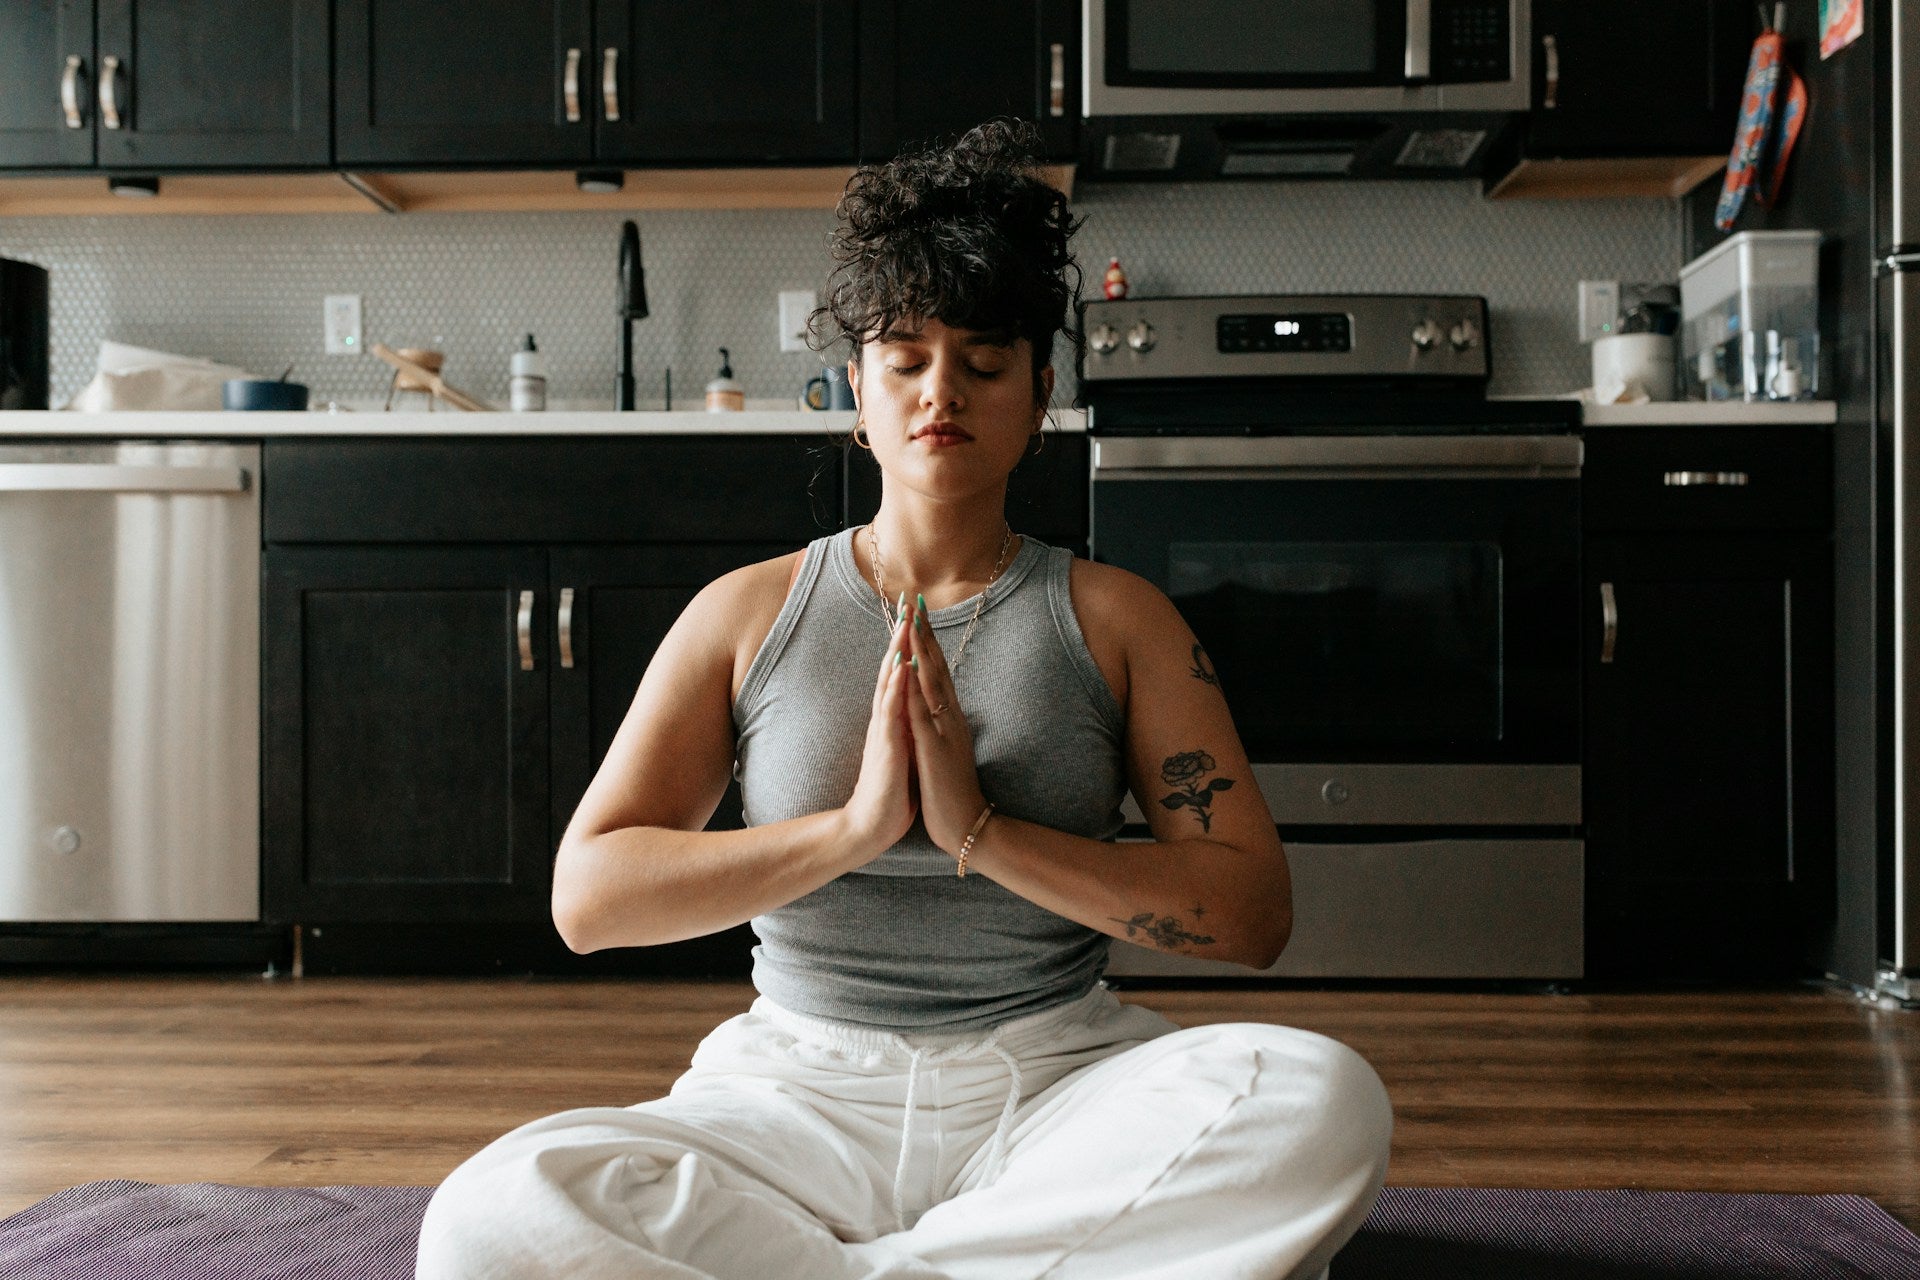 A dark-haired woman practicing meditation on a yoga mat on her kitchen floor